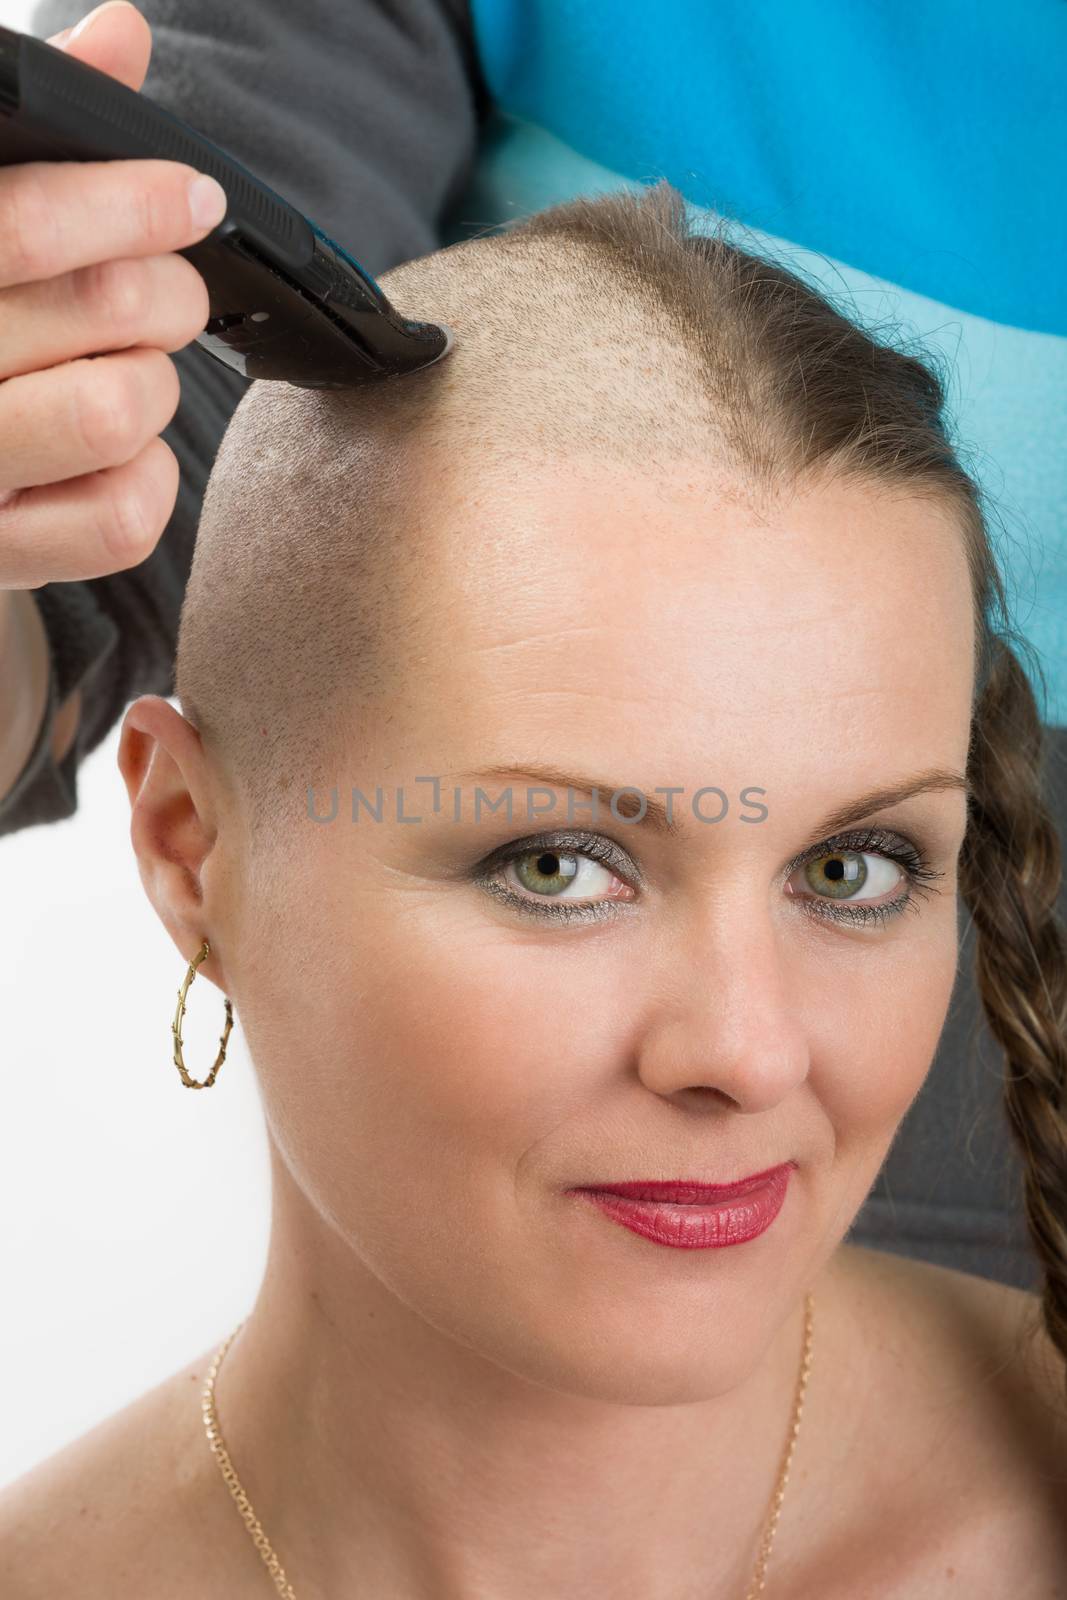 Portrait of beautiful middle age woman sad patient with cancer shaving heads, hope in healing. She lost her hair